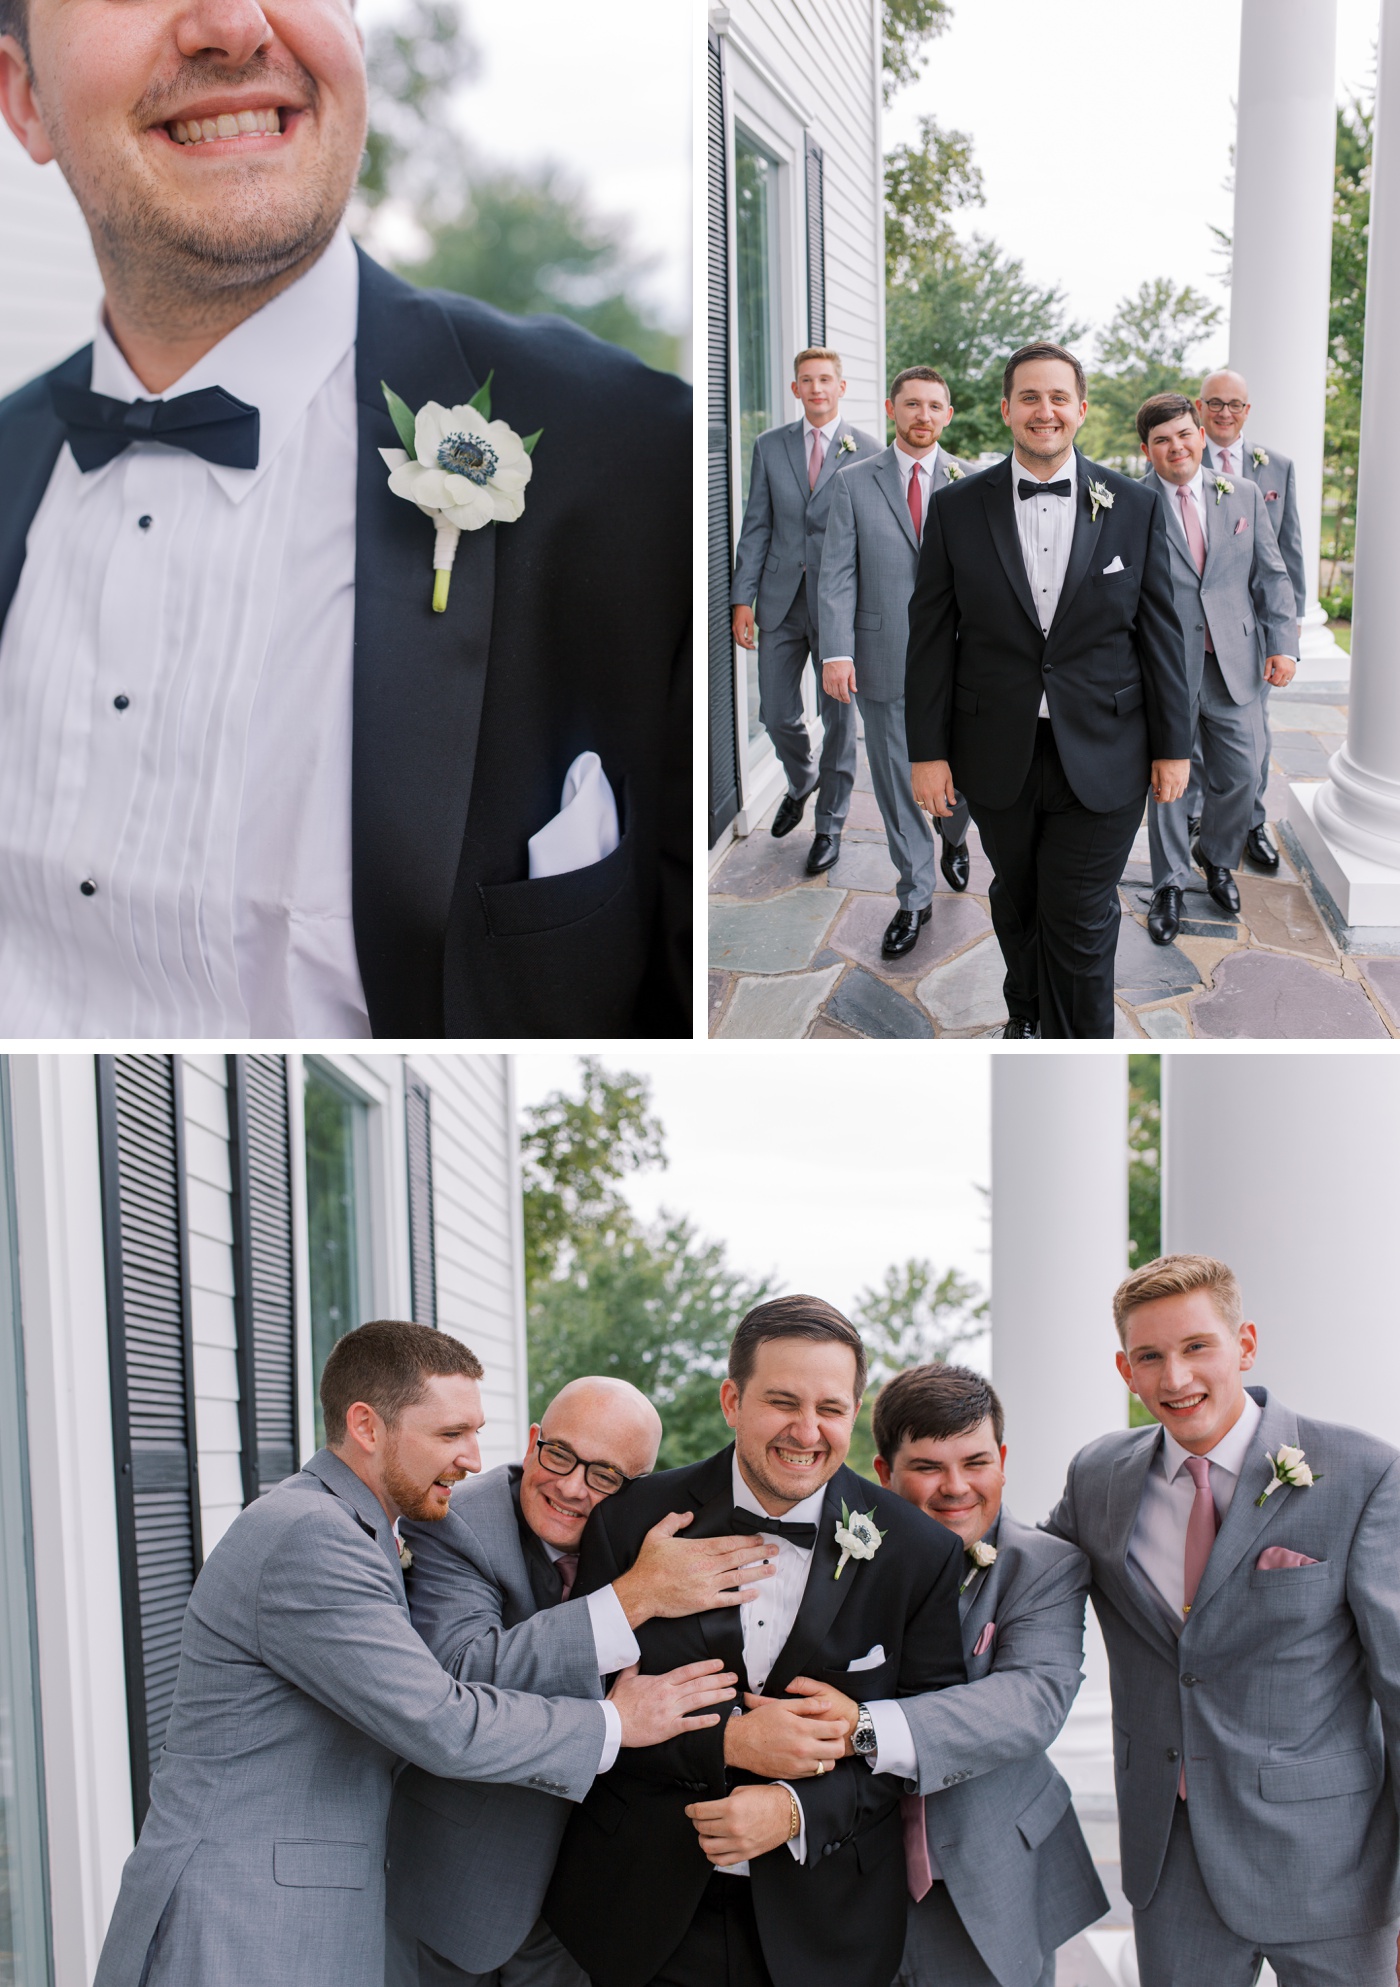 Groom in a black tuxedo with anemone boutonniere